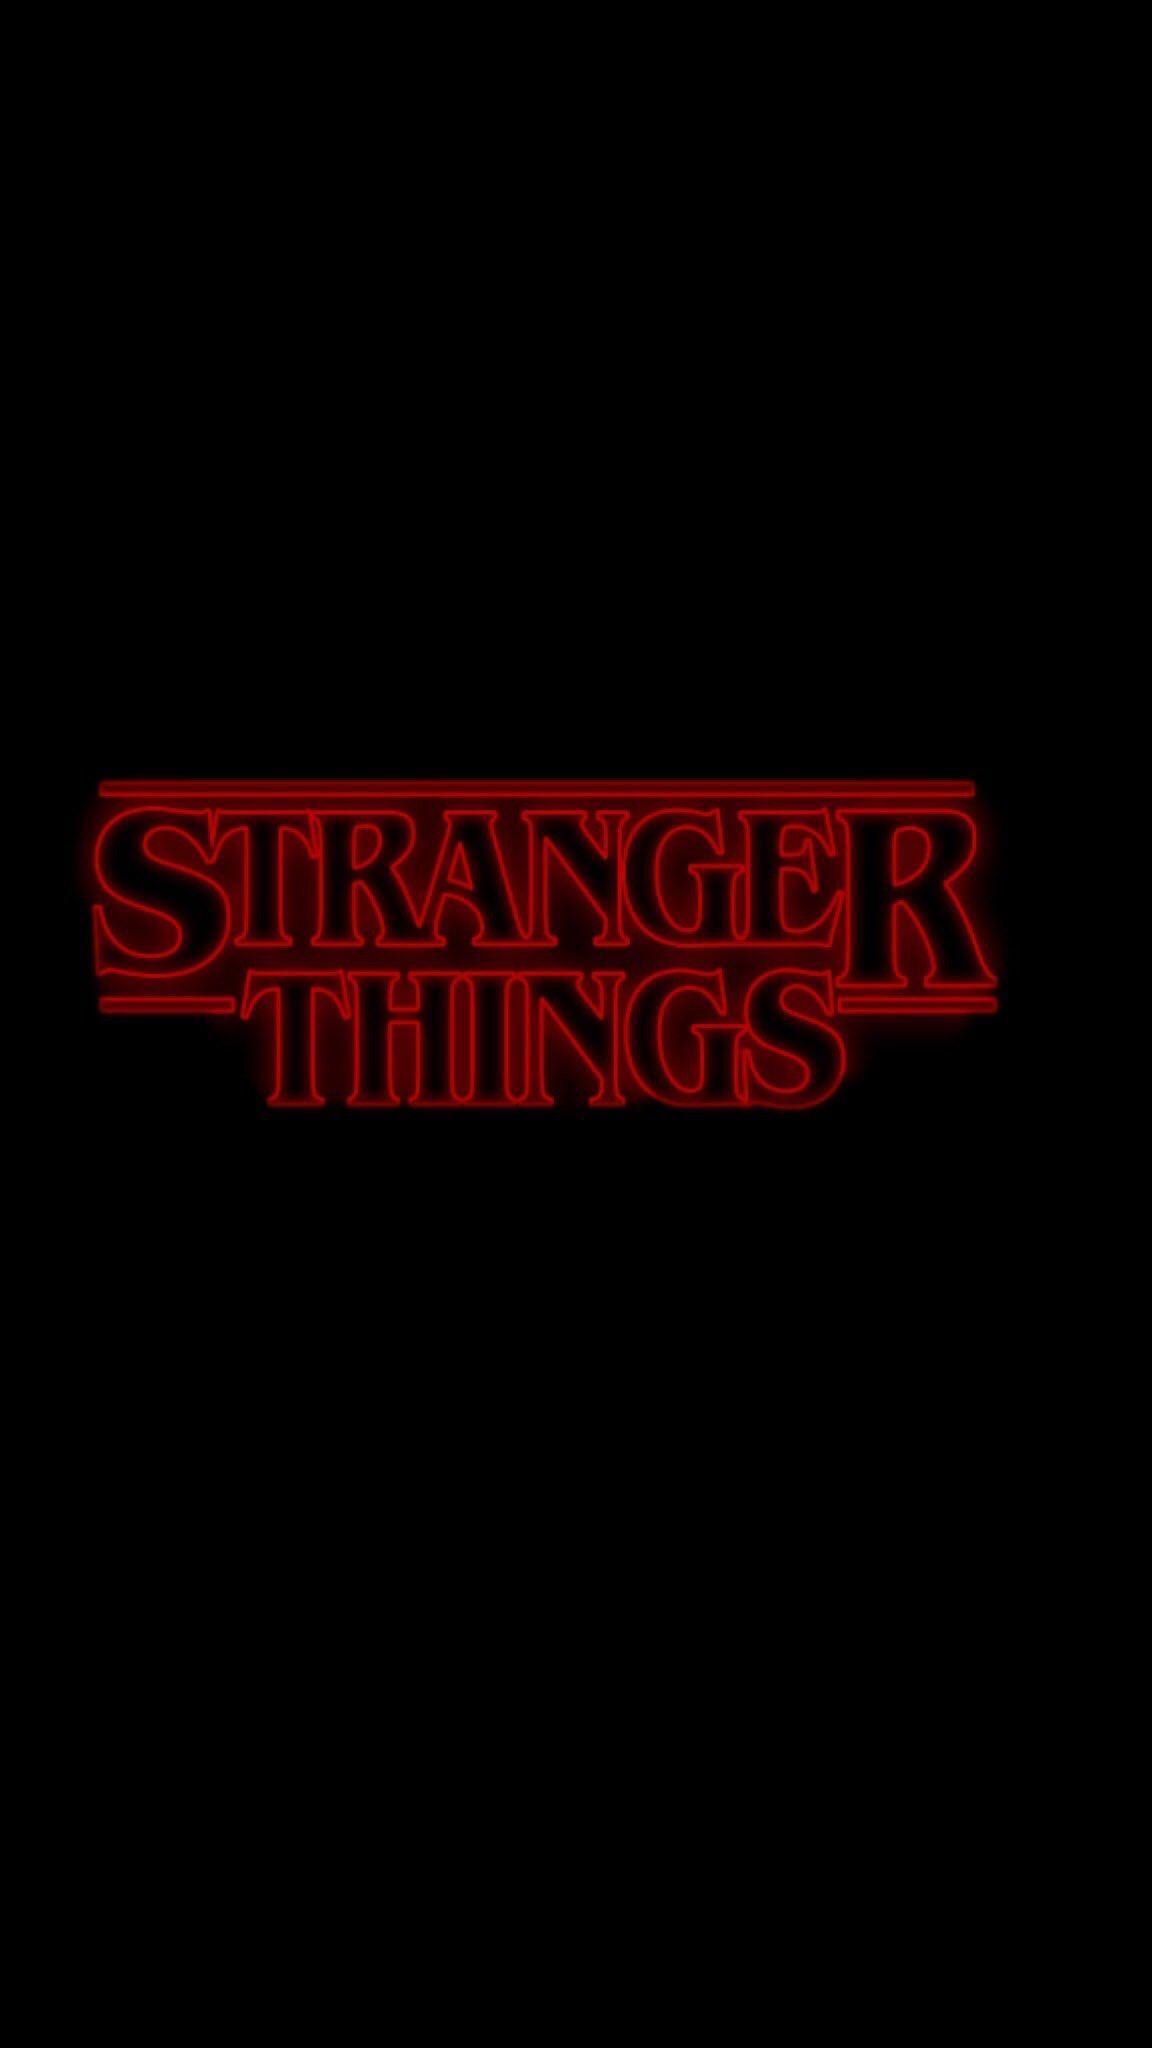 Pin by Heni on WALLPAPERS  Stranger things wallpaper Stranger things  art Stranger things poster